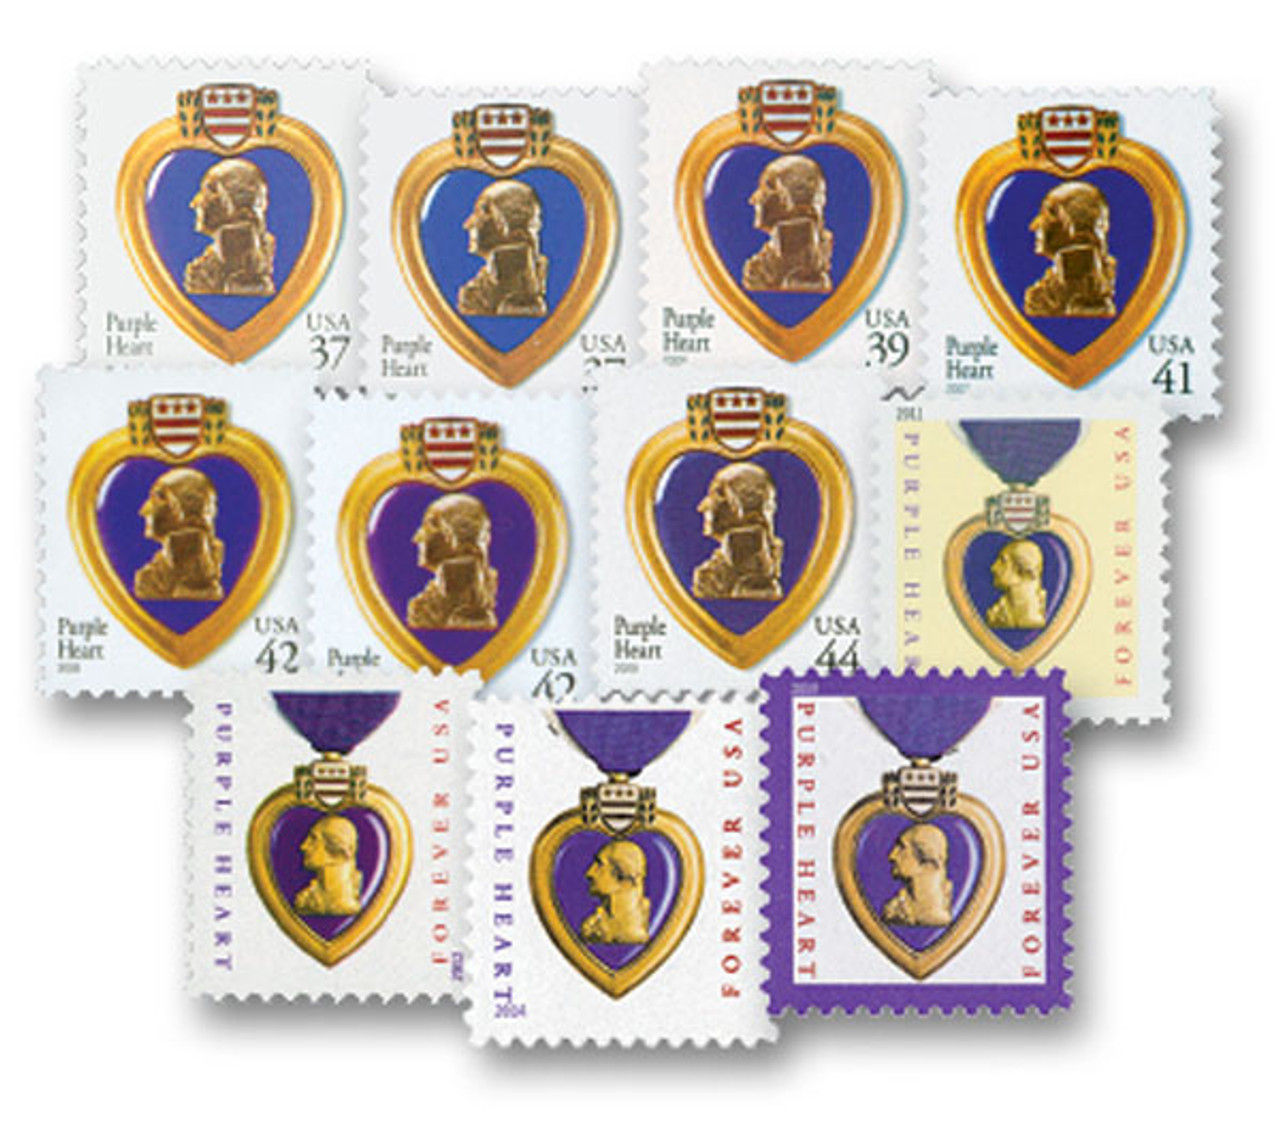 3784/5419 - 2003-19 Purple Heart, complete set of 11 stamps - Mystic Stamp  Company